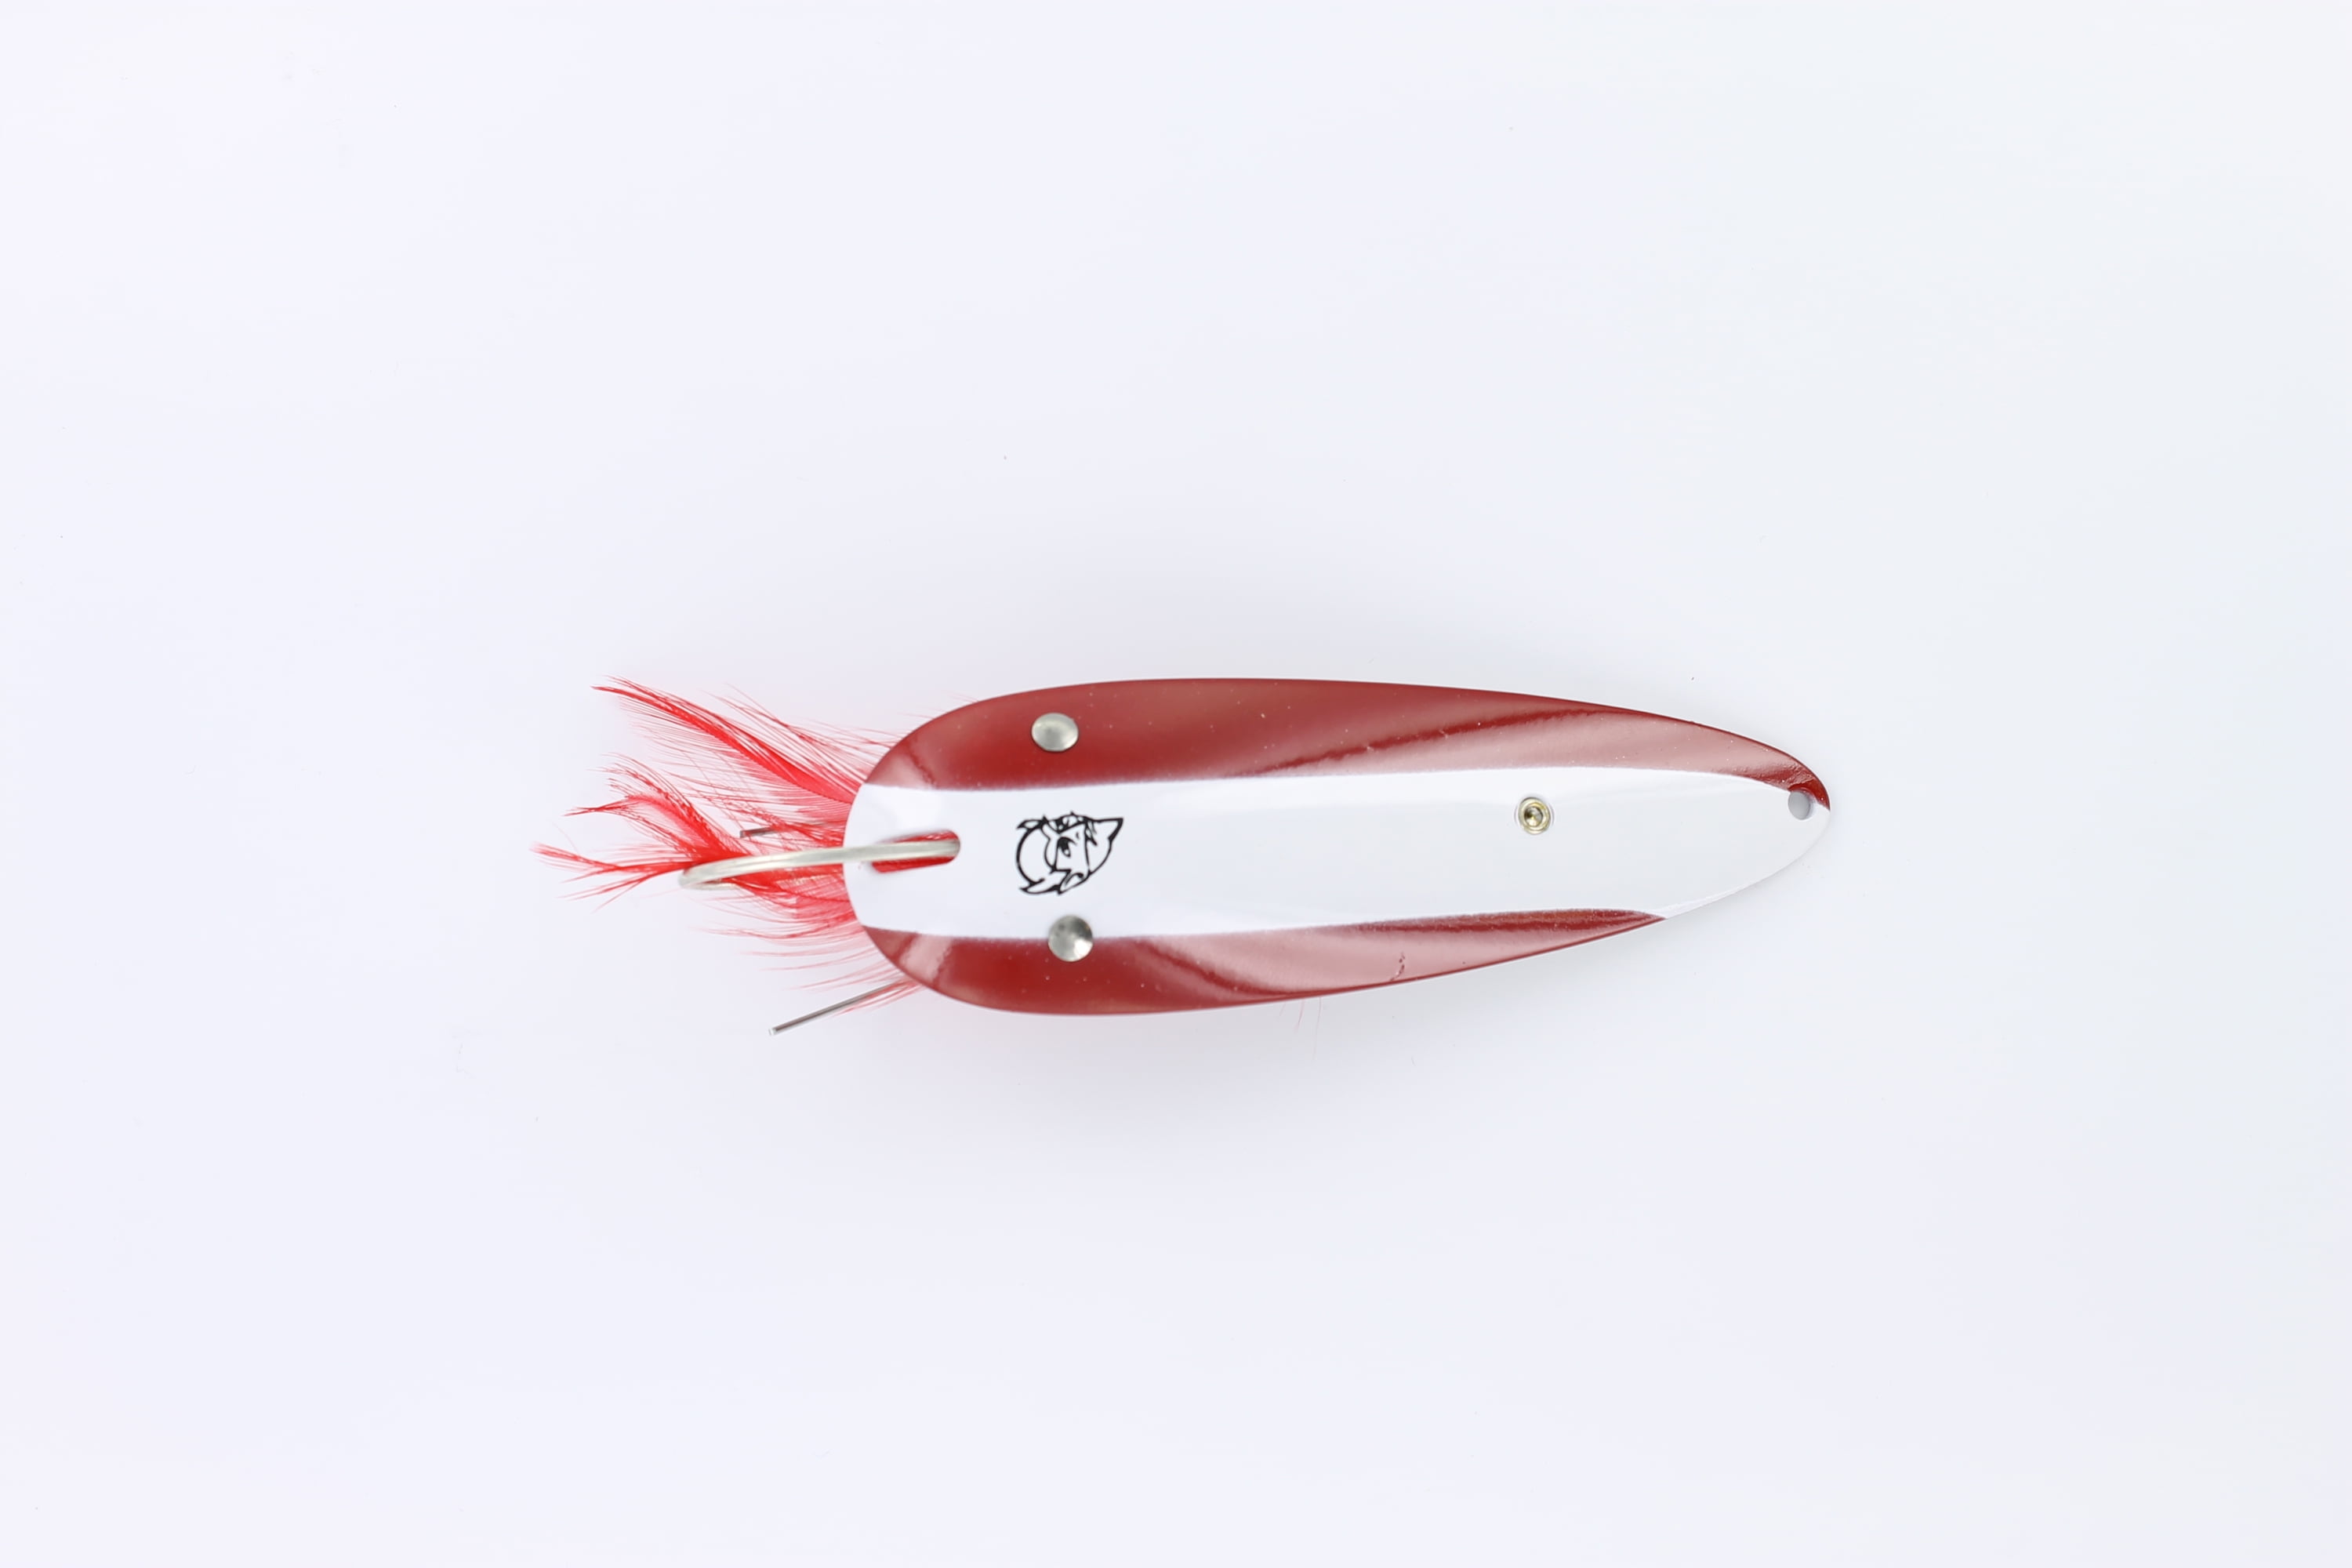 Eppinger Dardevle Fishing Lure Spoon 3/4 Oz Nickel Back Red & White for sale online 